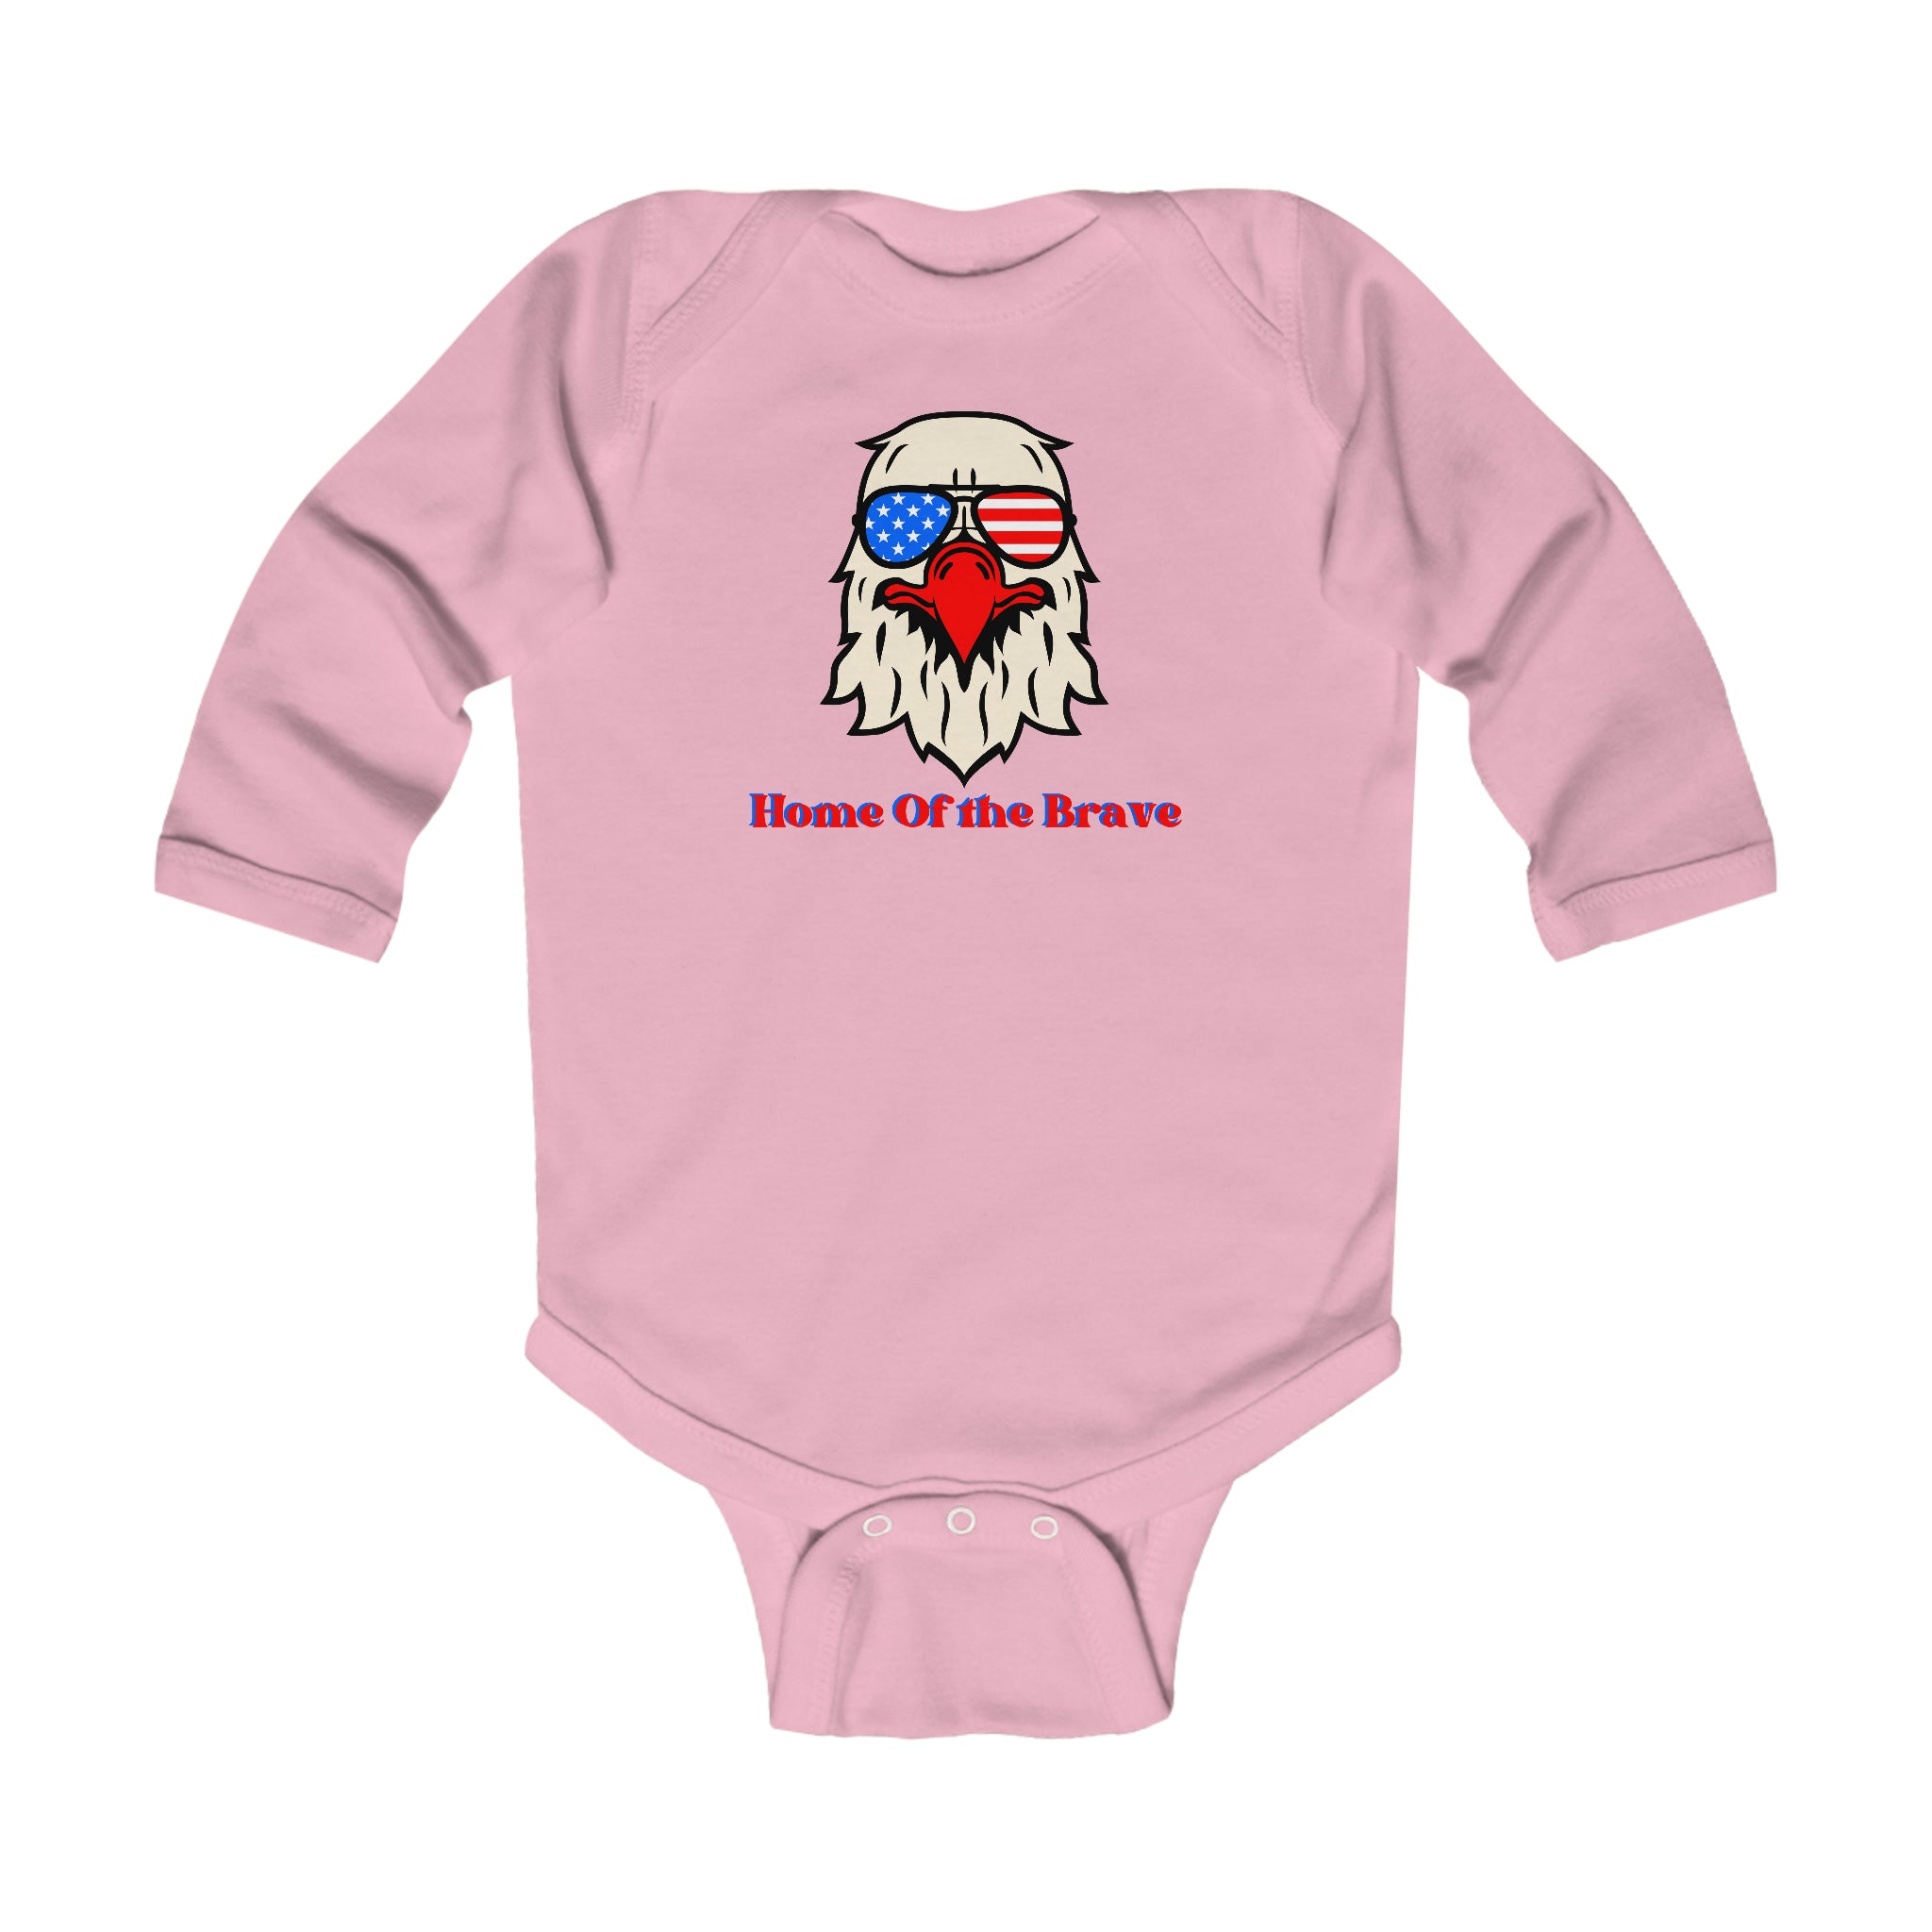 Home Of The Brave Long Sleeve Baby Bodysuit